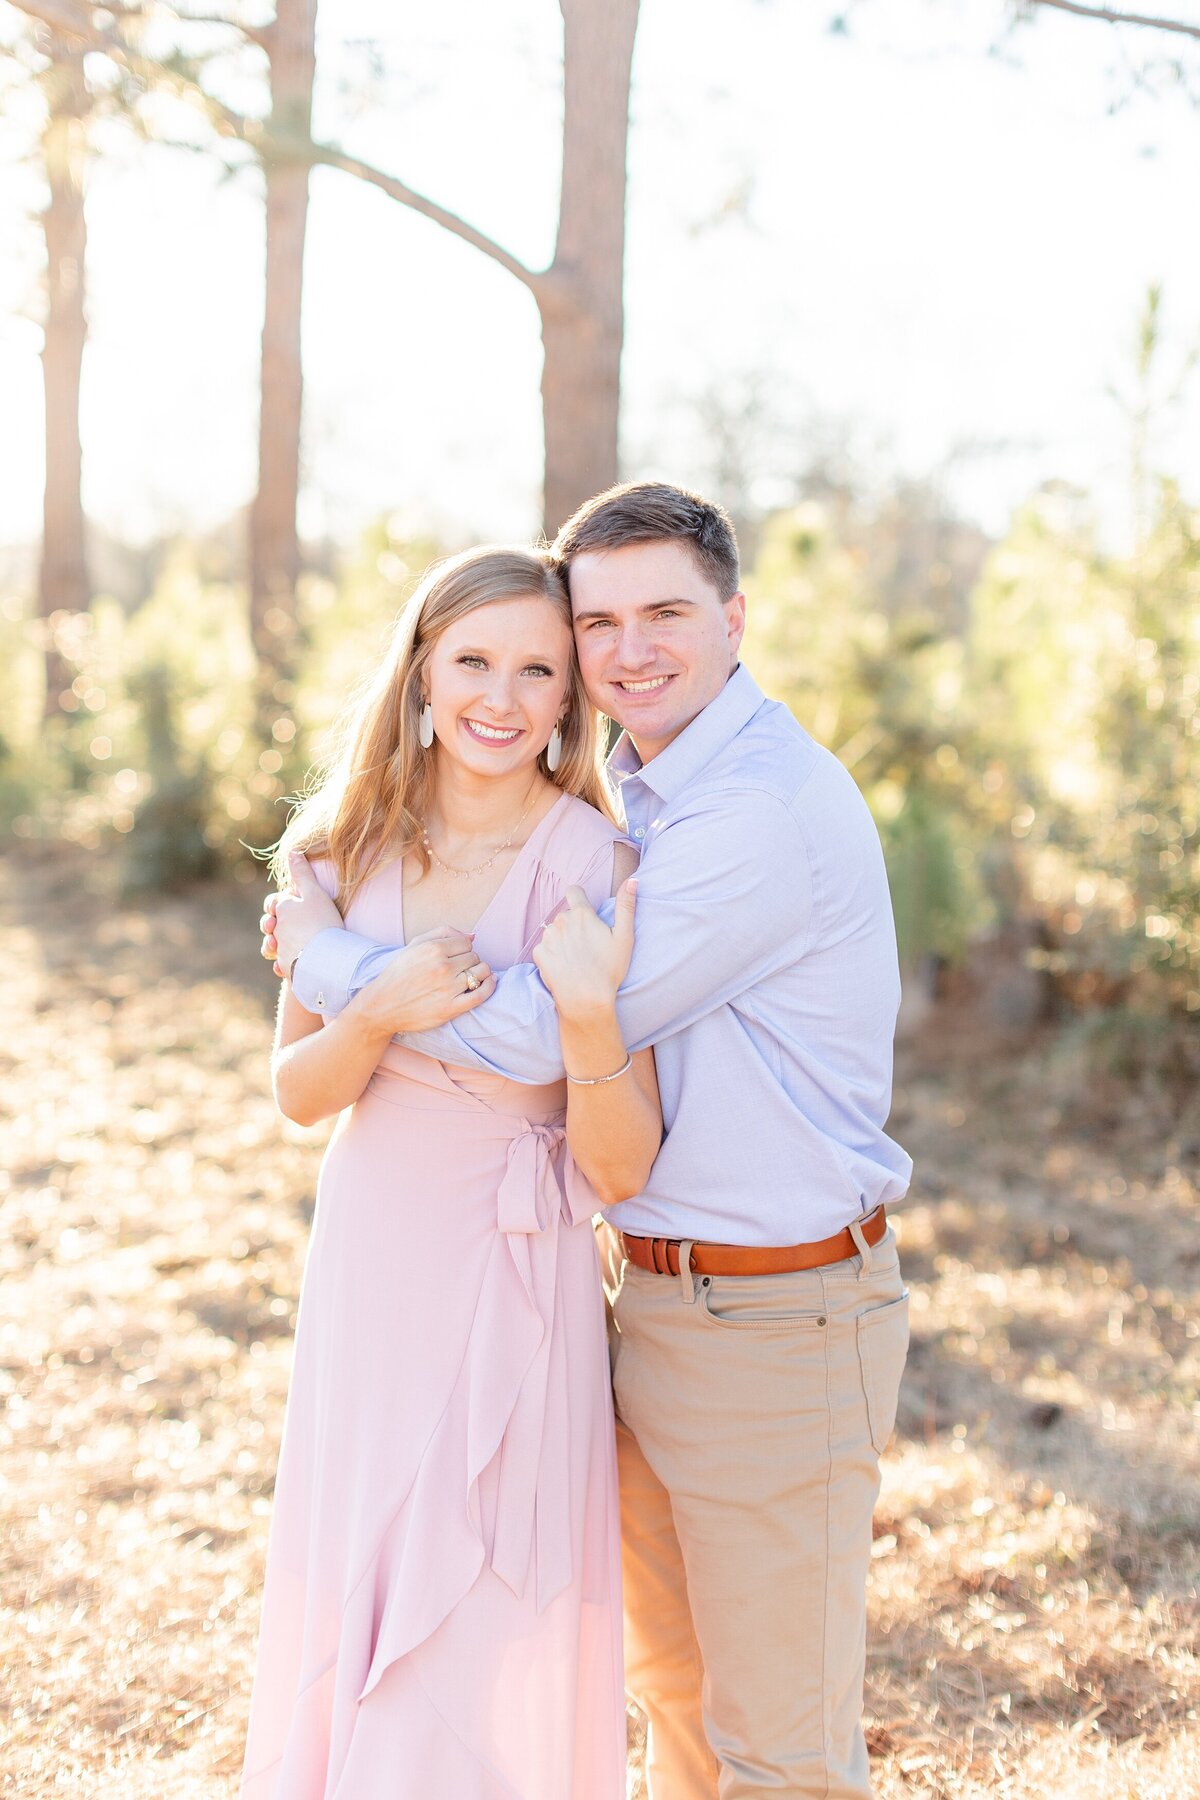 Houston Engagement Photography Sunset Bright and Airy